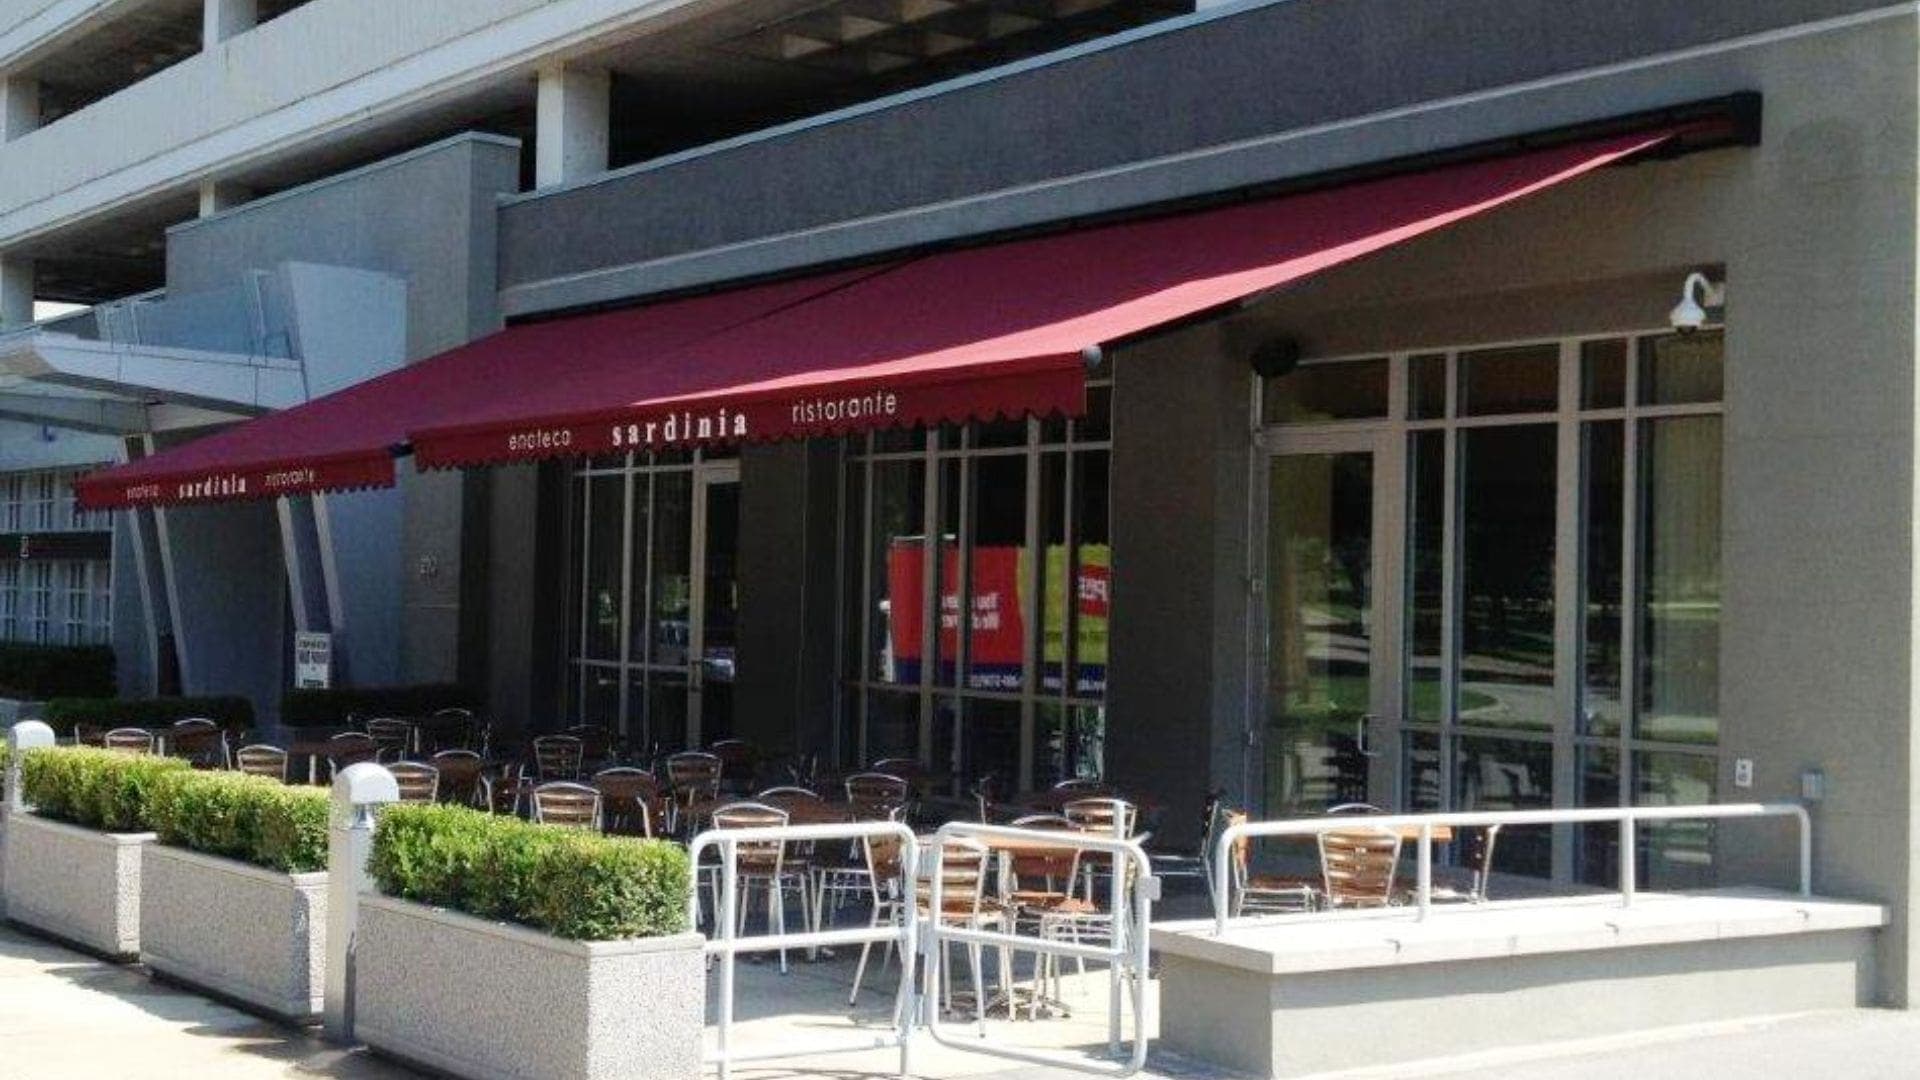 Commercial Awning Ideas that Will Make Your Business Stand Out